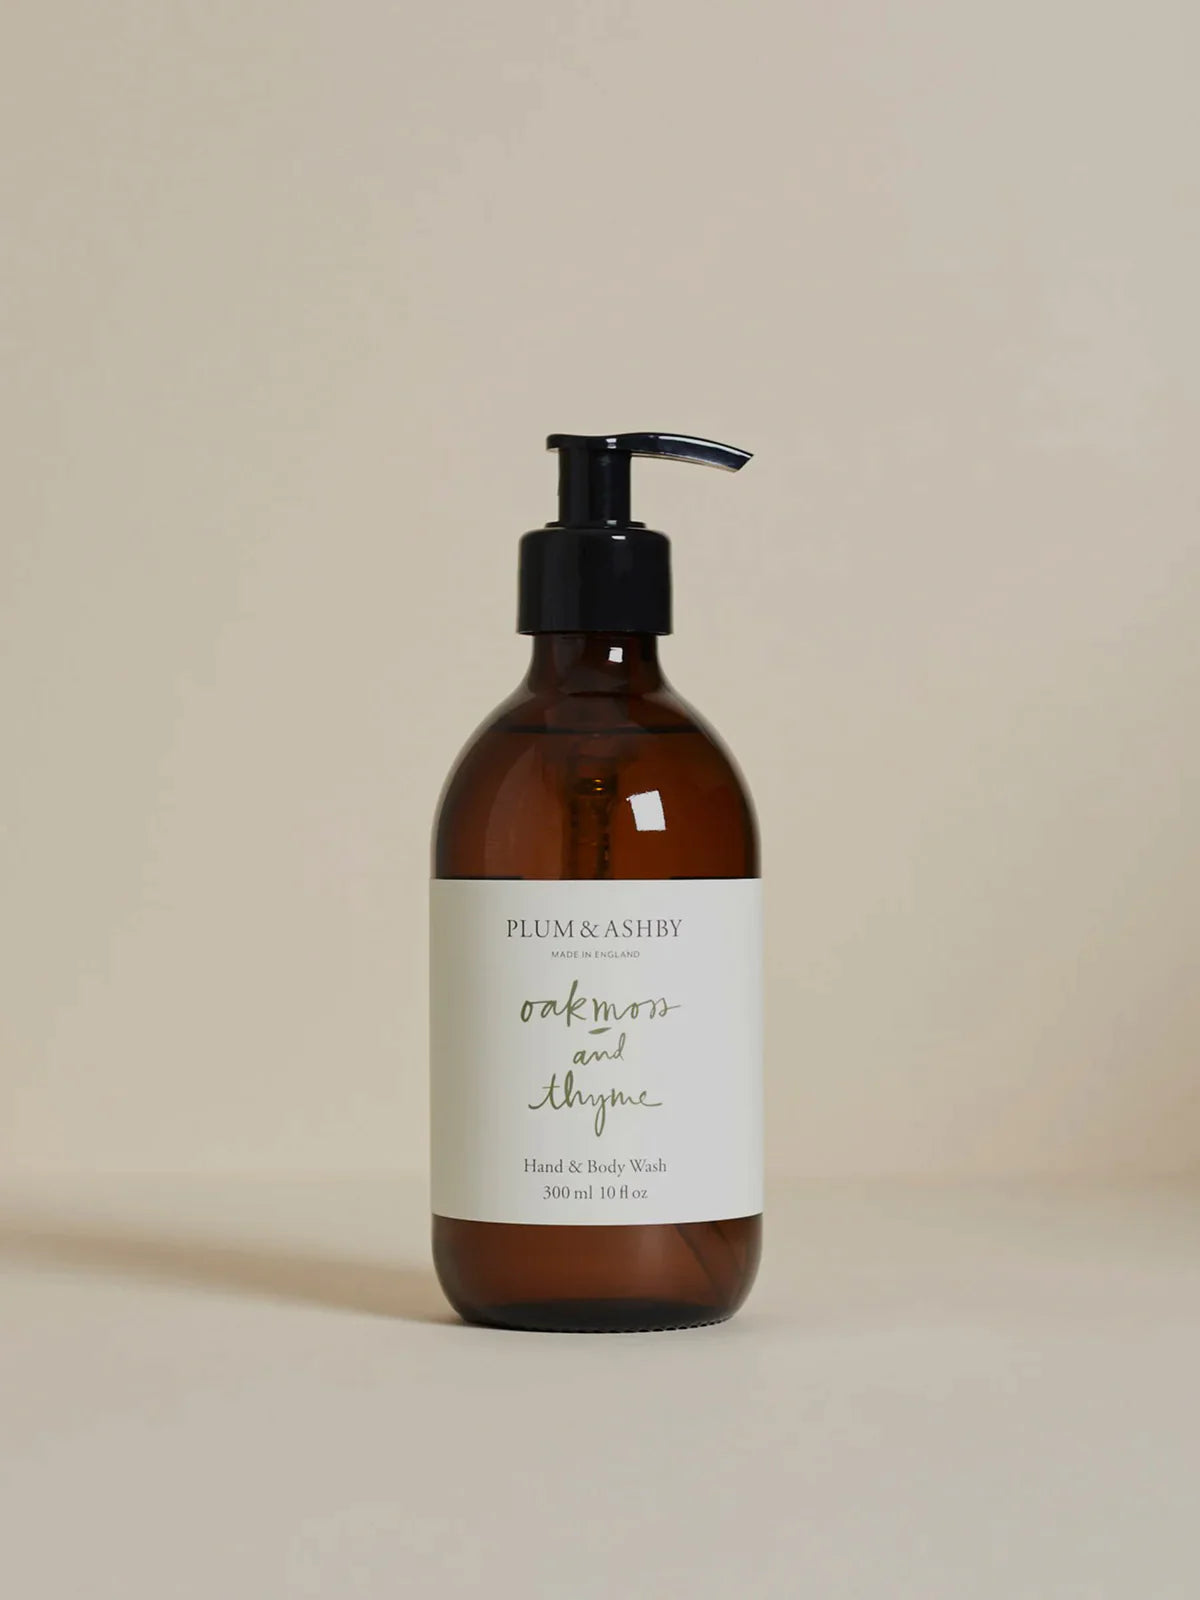 Hand and Body Wash Oakmoss & Thyme